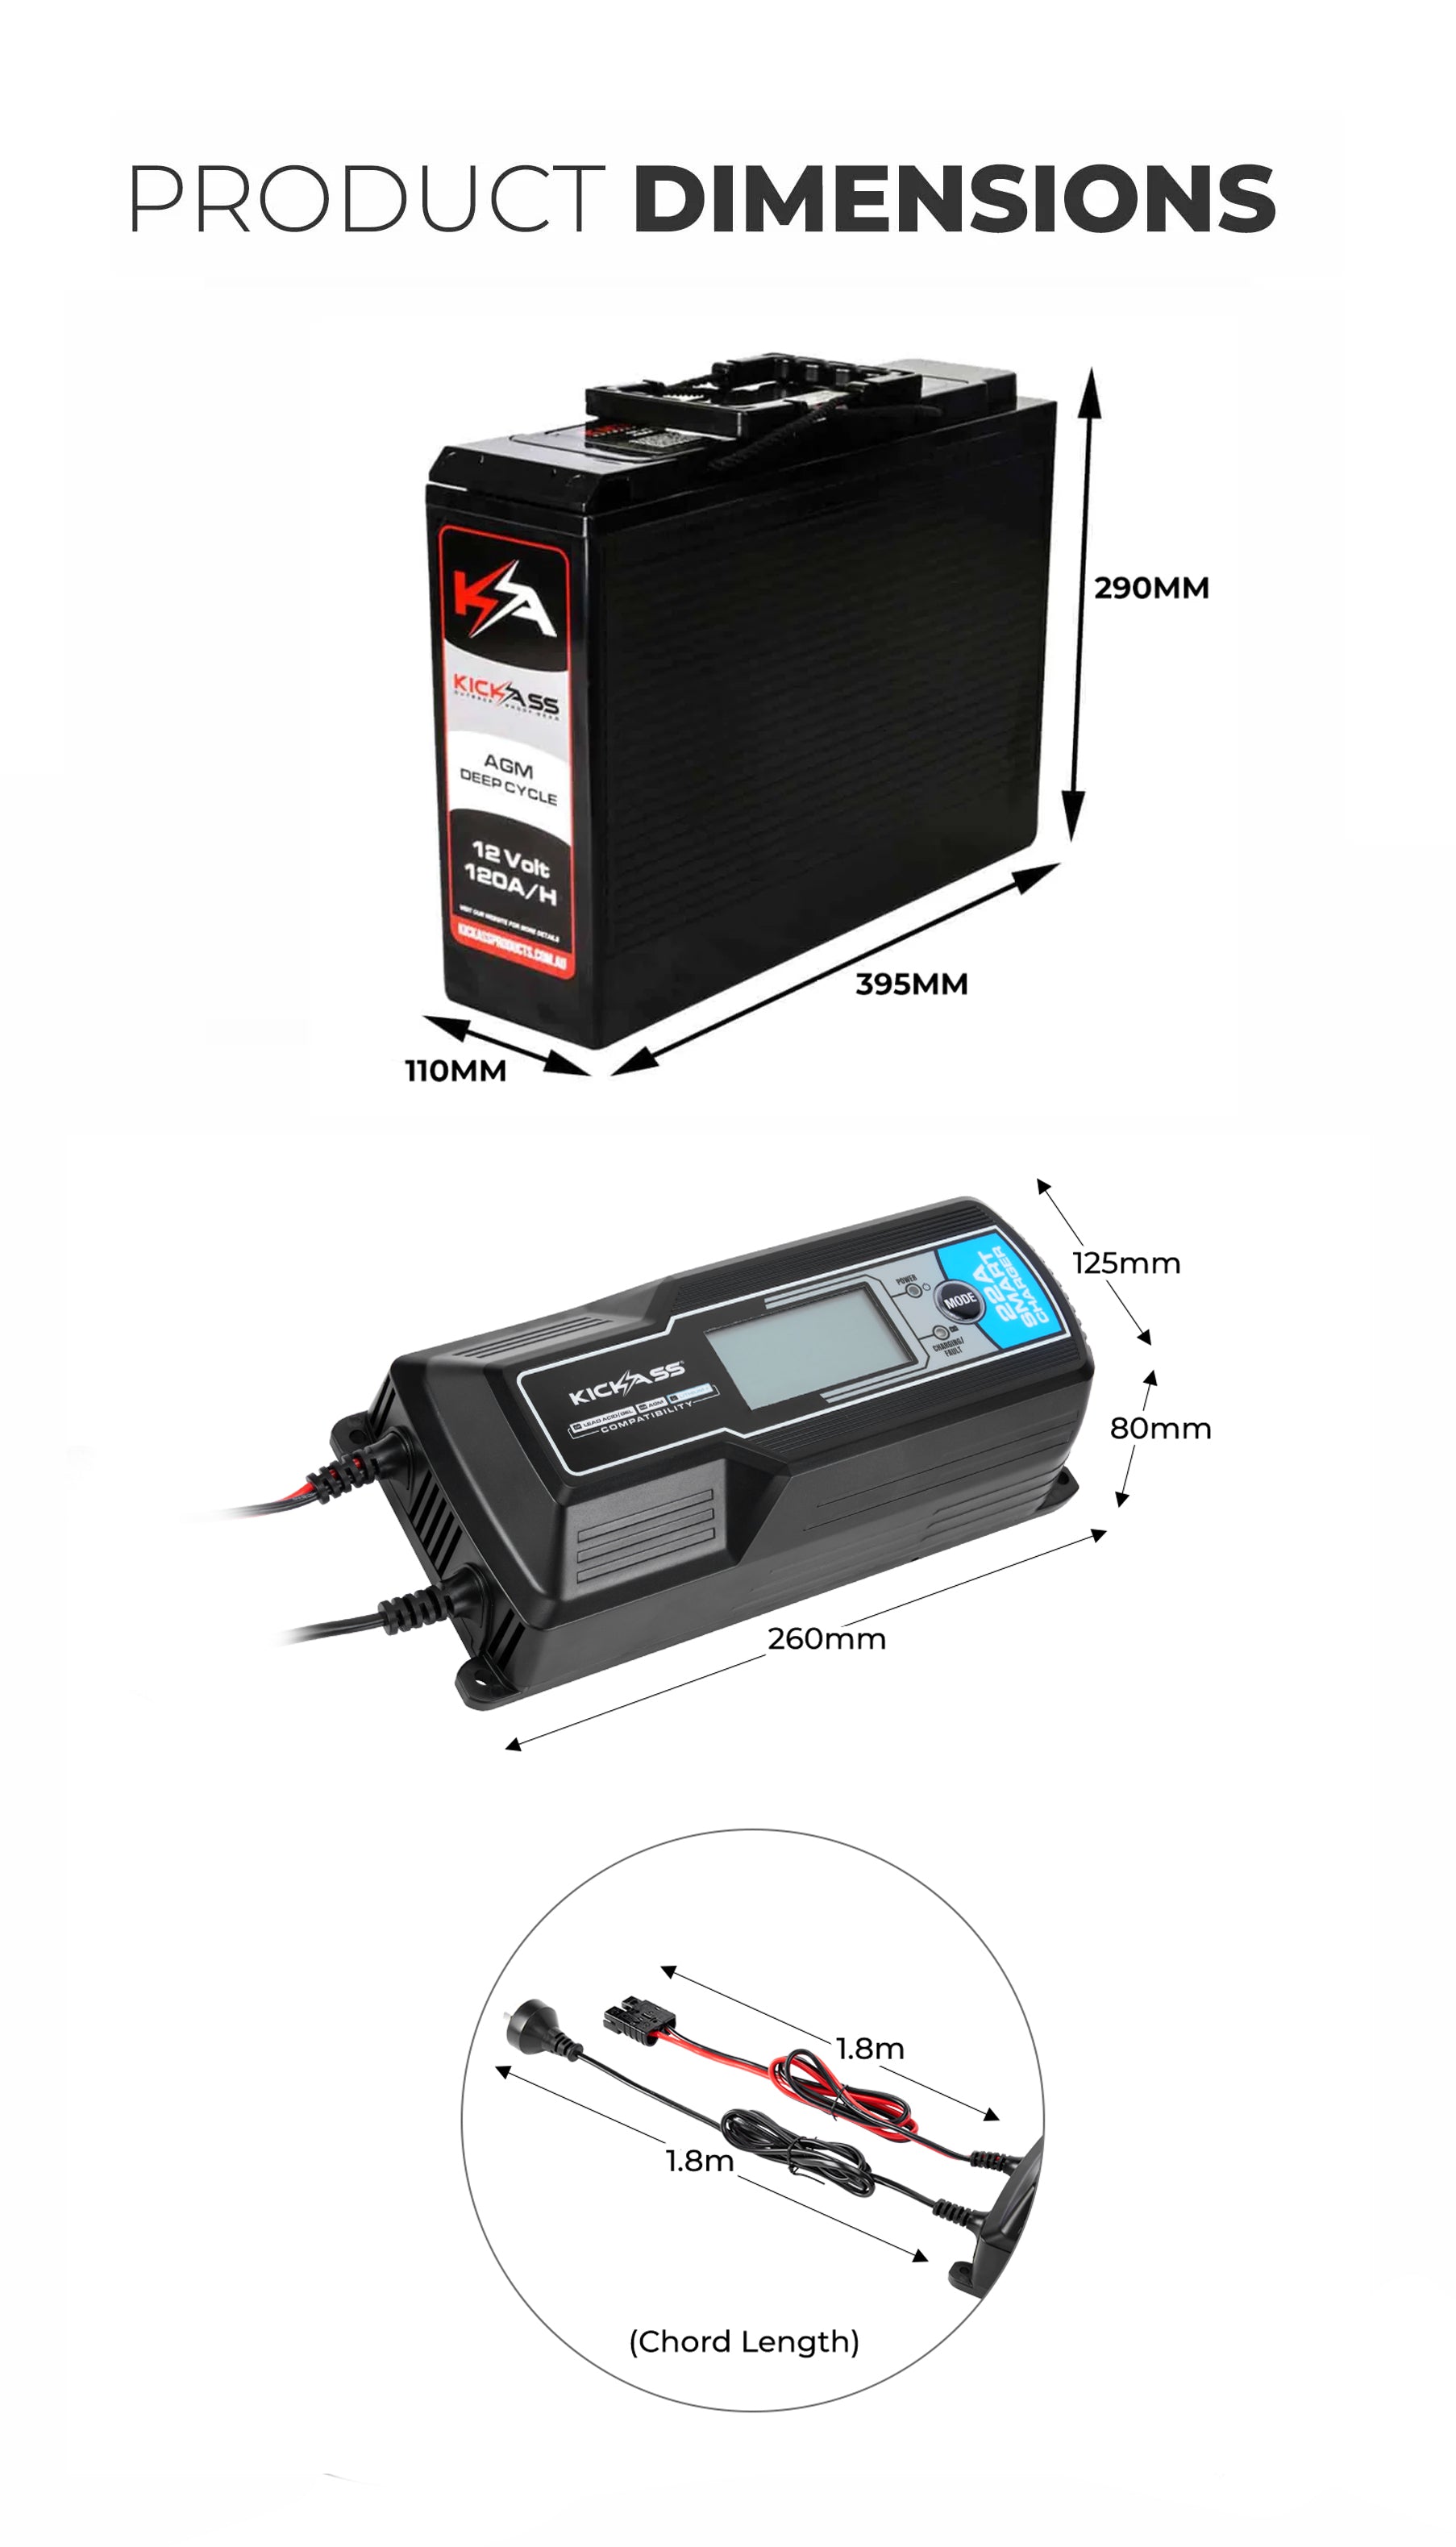 KICKASS 12V 22 Amp - 9 Stage Automatic Battery Charger for STD, AGM & Lithium Batteries